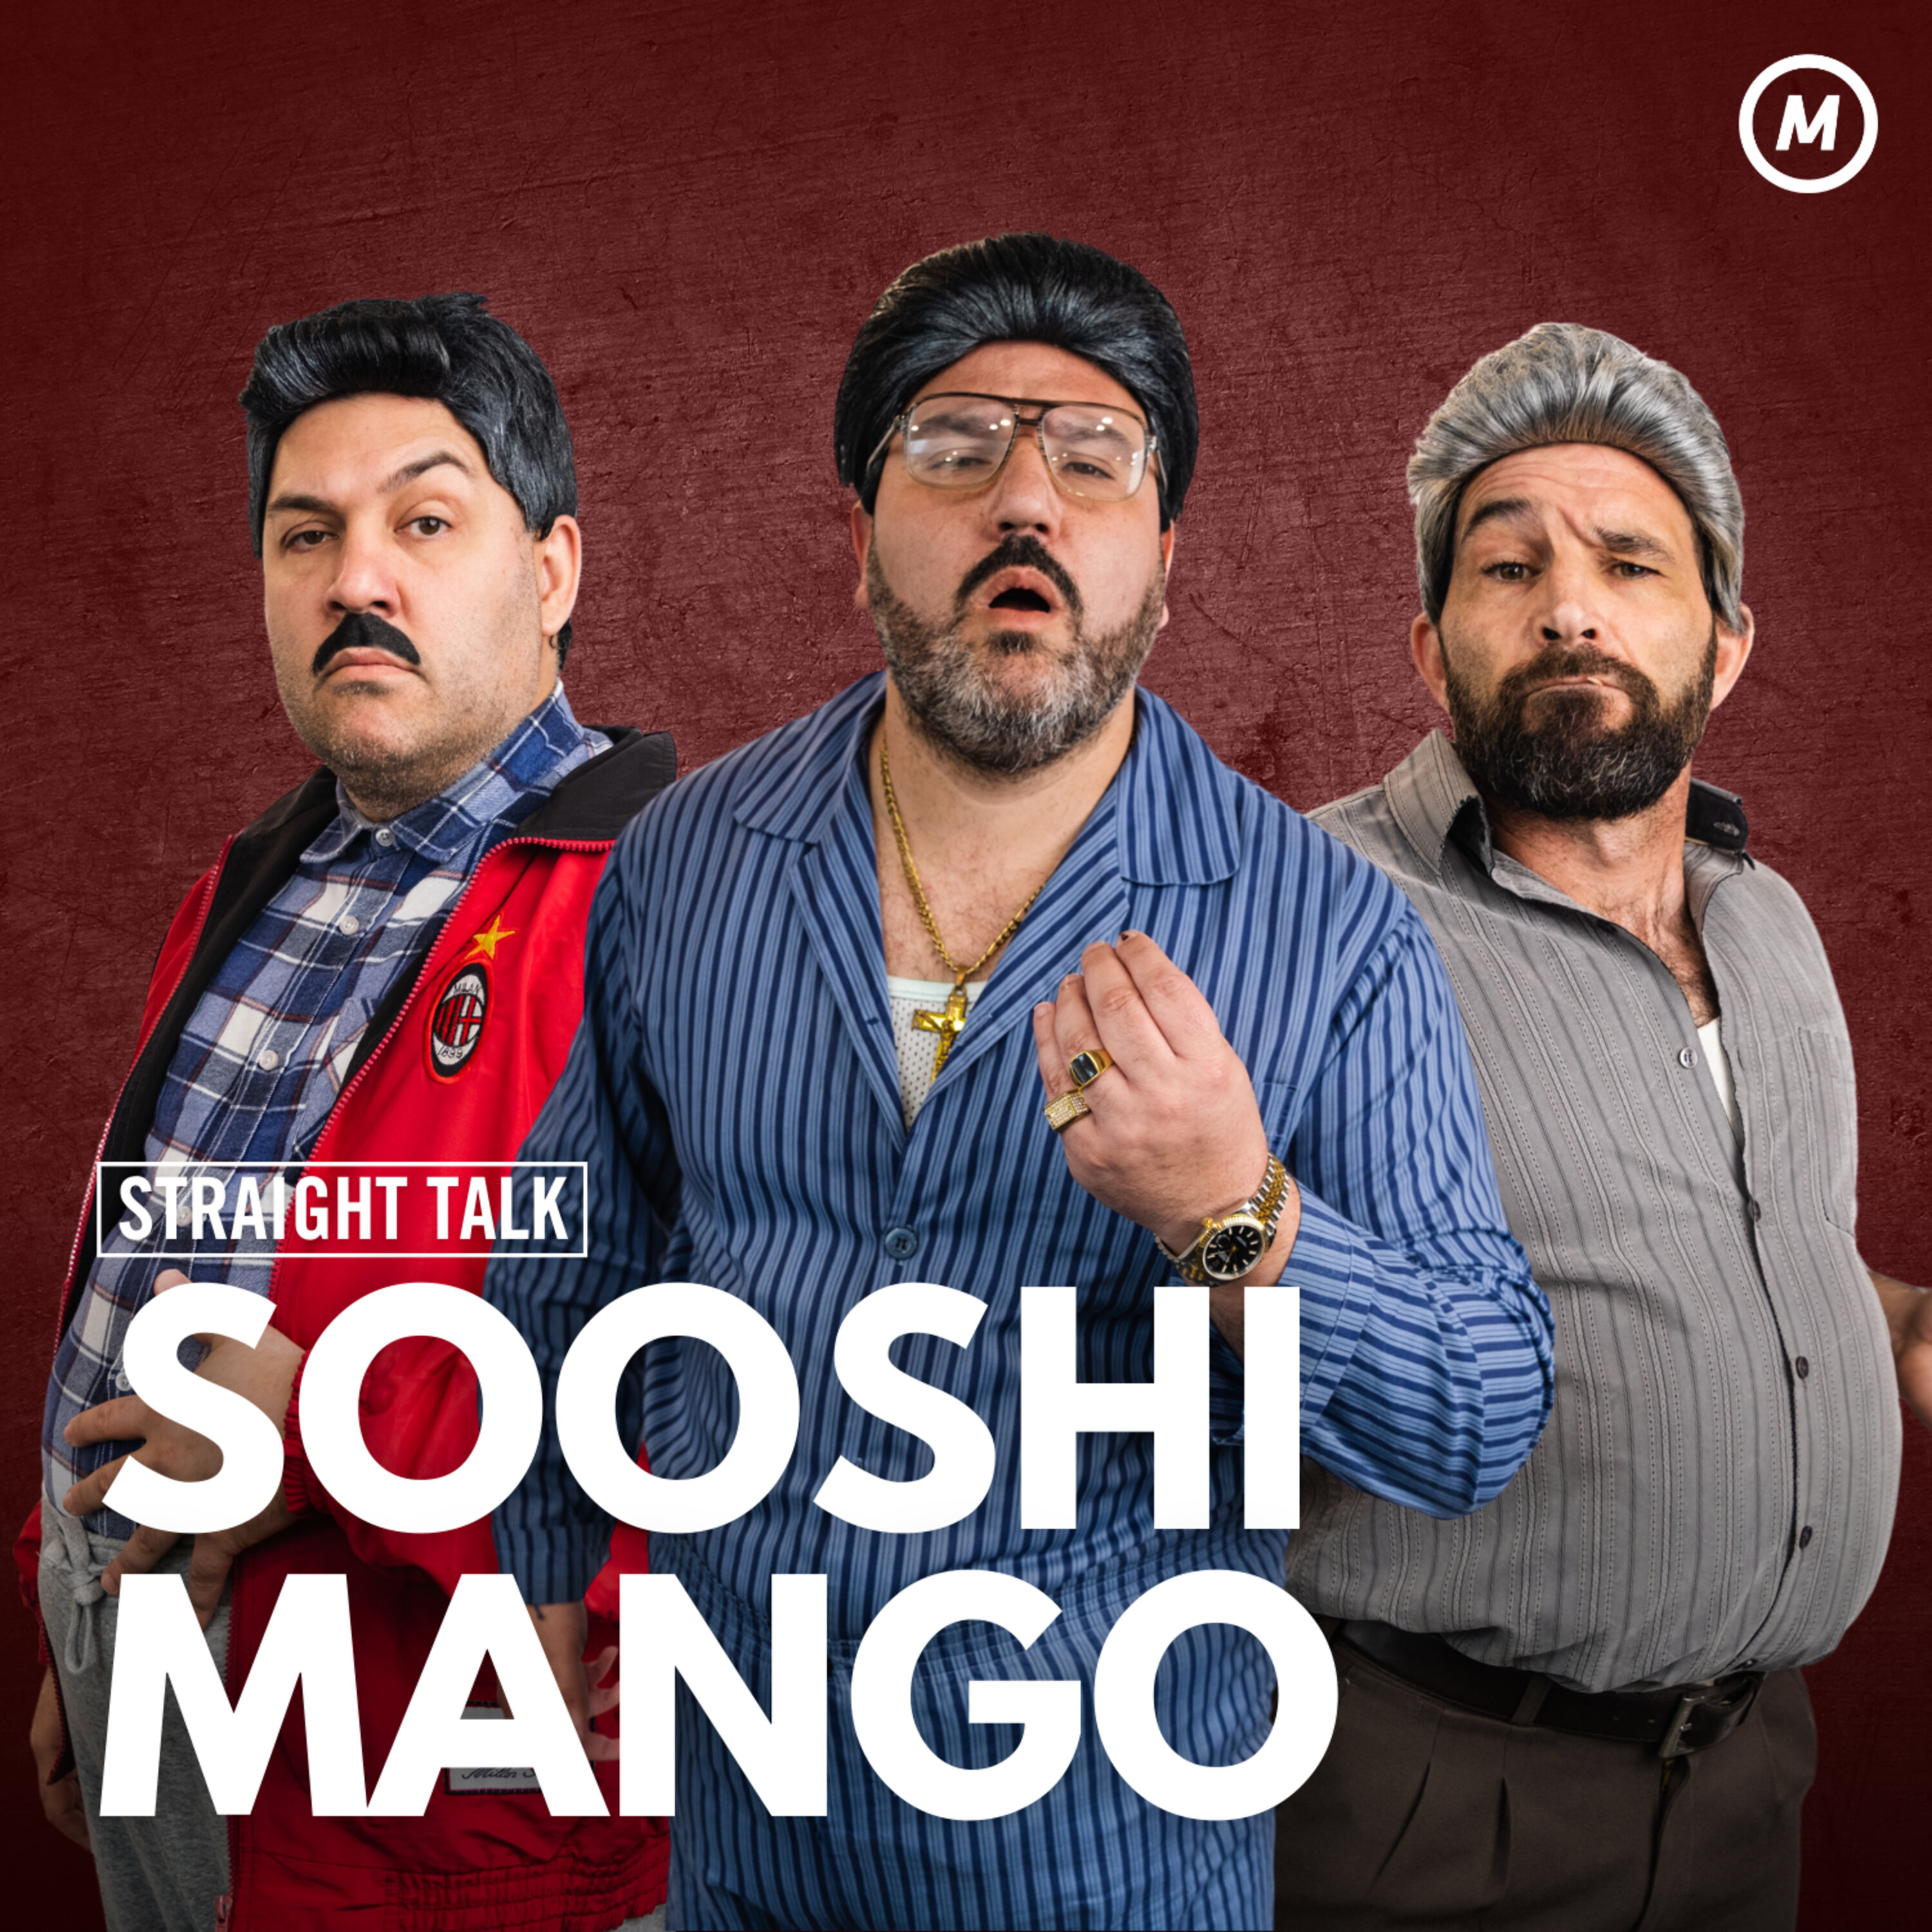 #58 Comedy trio Sooshi Mango: sold-out arena's, ethnic dads, internet creators